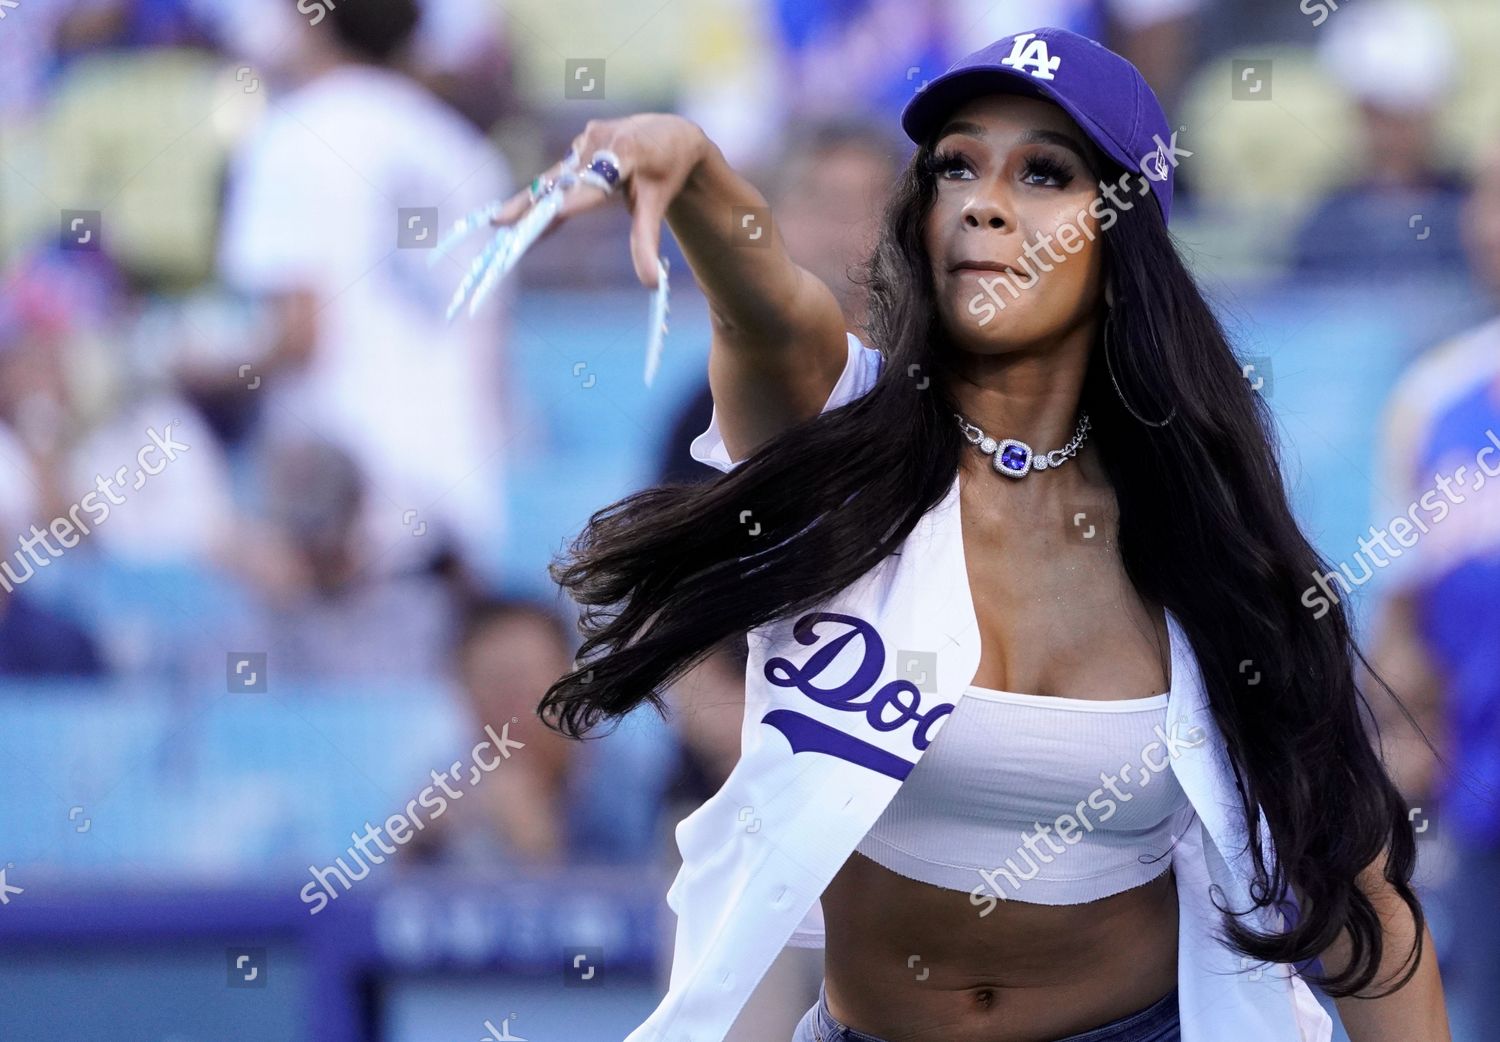 Saweetie Throws The First Pitch At The L.A. Dodgers Game